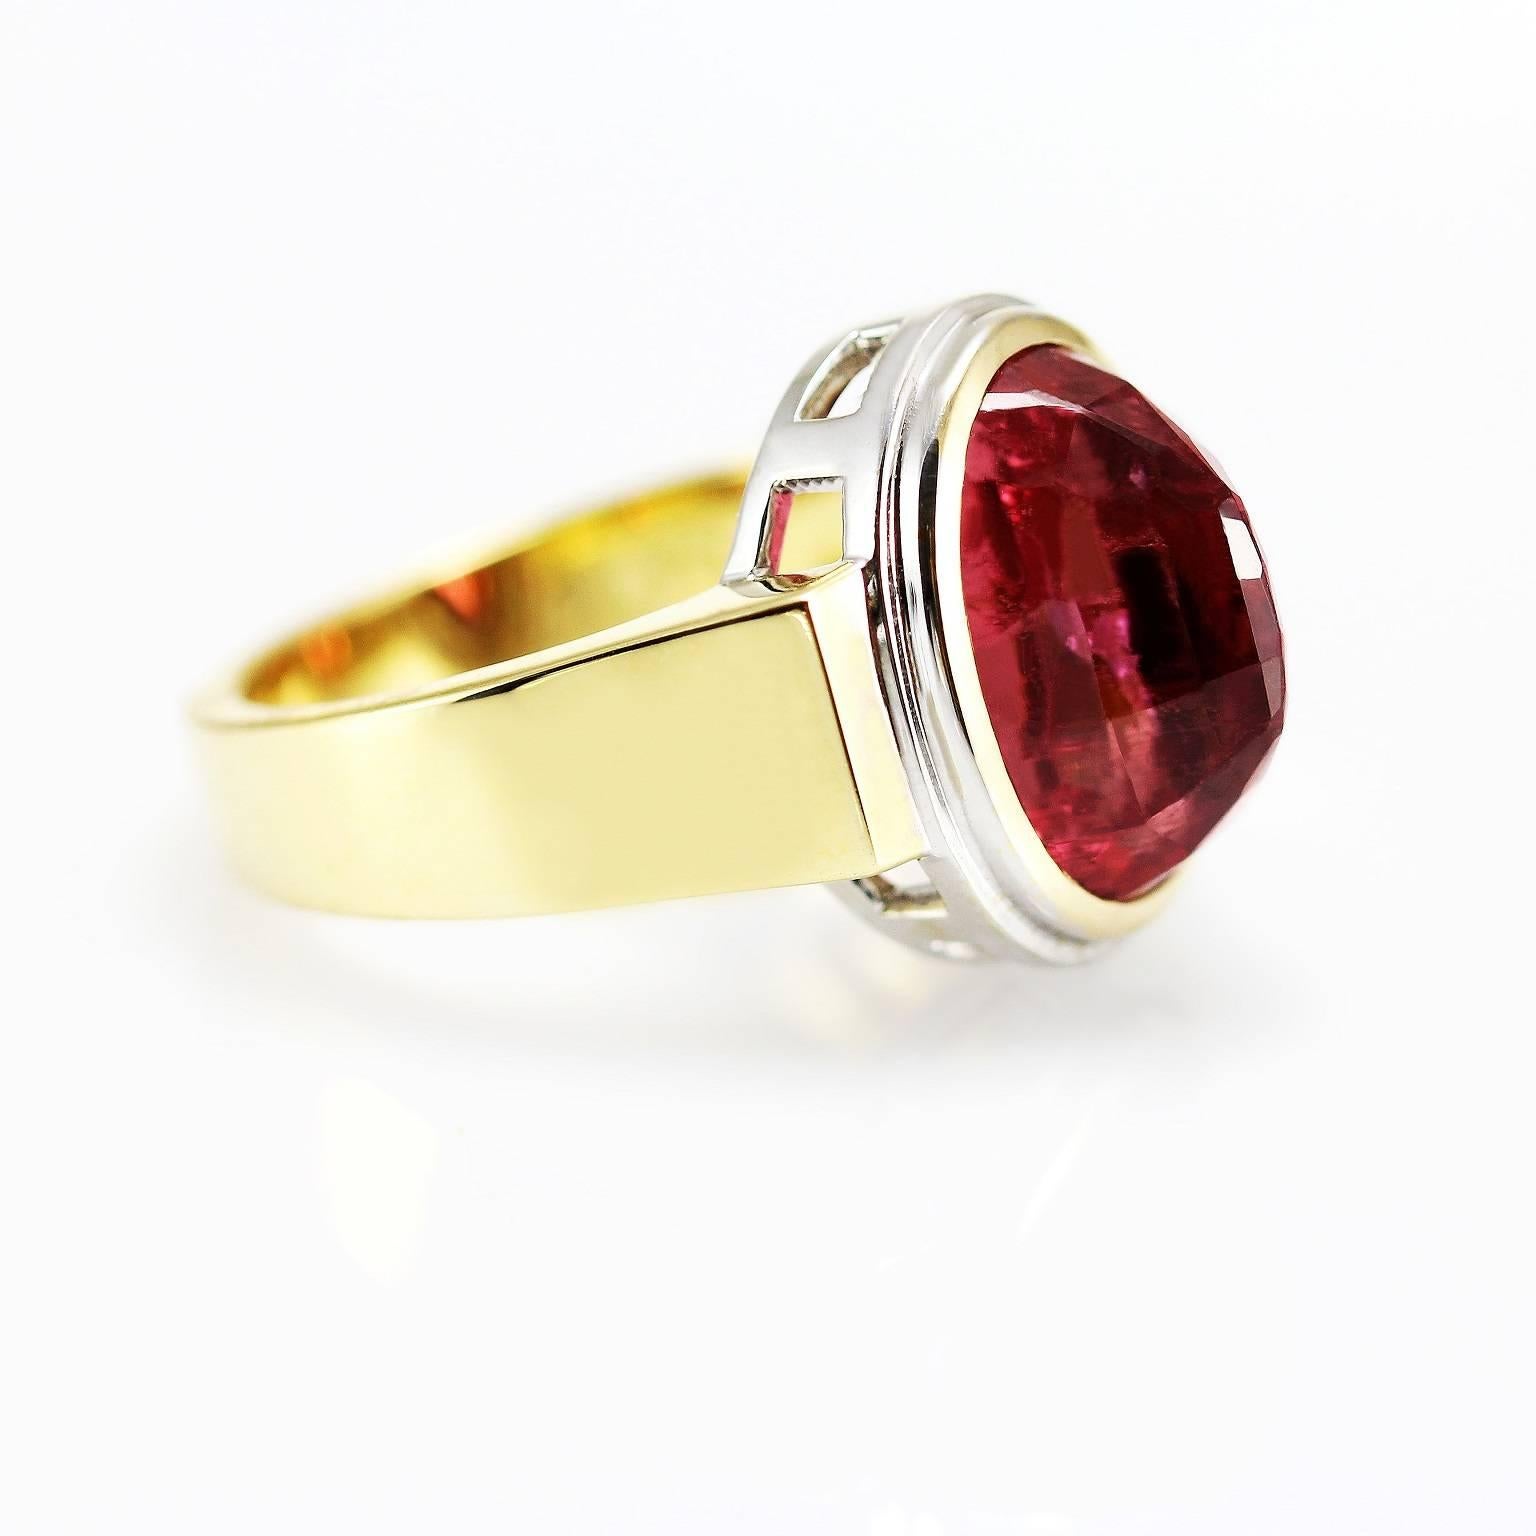  7.38 Carat Orange- Pink Tourmaline Cocktail Ring In 18 Carat Two Tone Gold In New Condition For Sale In South Perth, AU